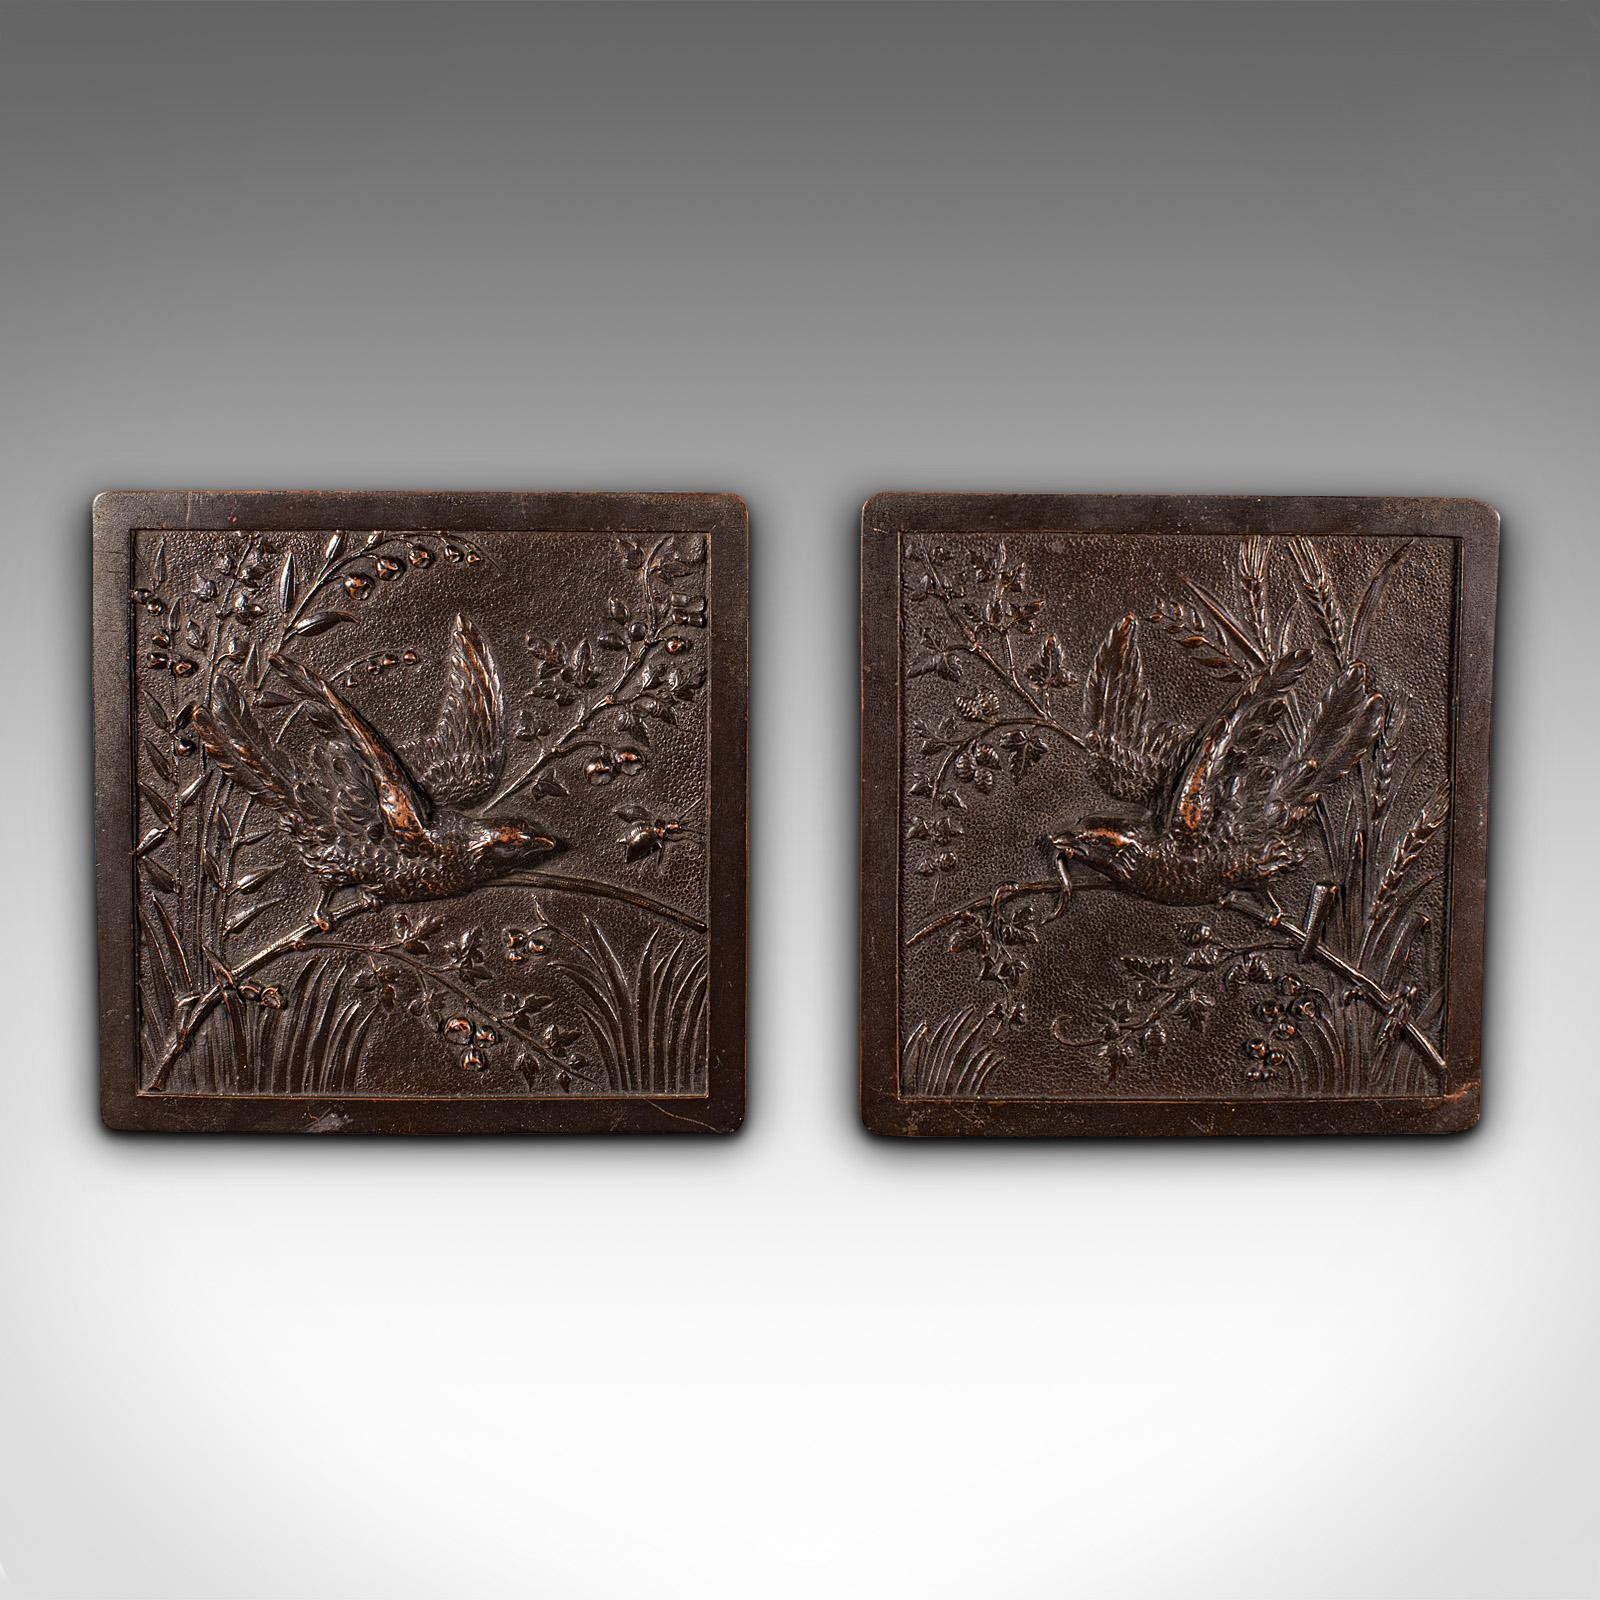 This is a pair of antique decorative plaques. A Japanese, bronze wall panel, dating to the early Victorian period, circa 1850.

Accentuate your wall with a pair of charming Edo period plaques
Displaying a desirable aged patina throughout
Bronze